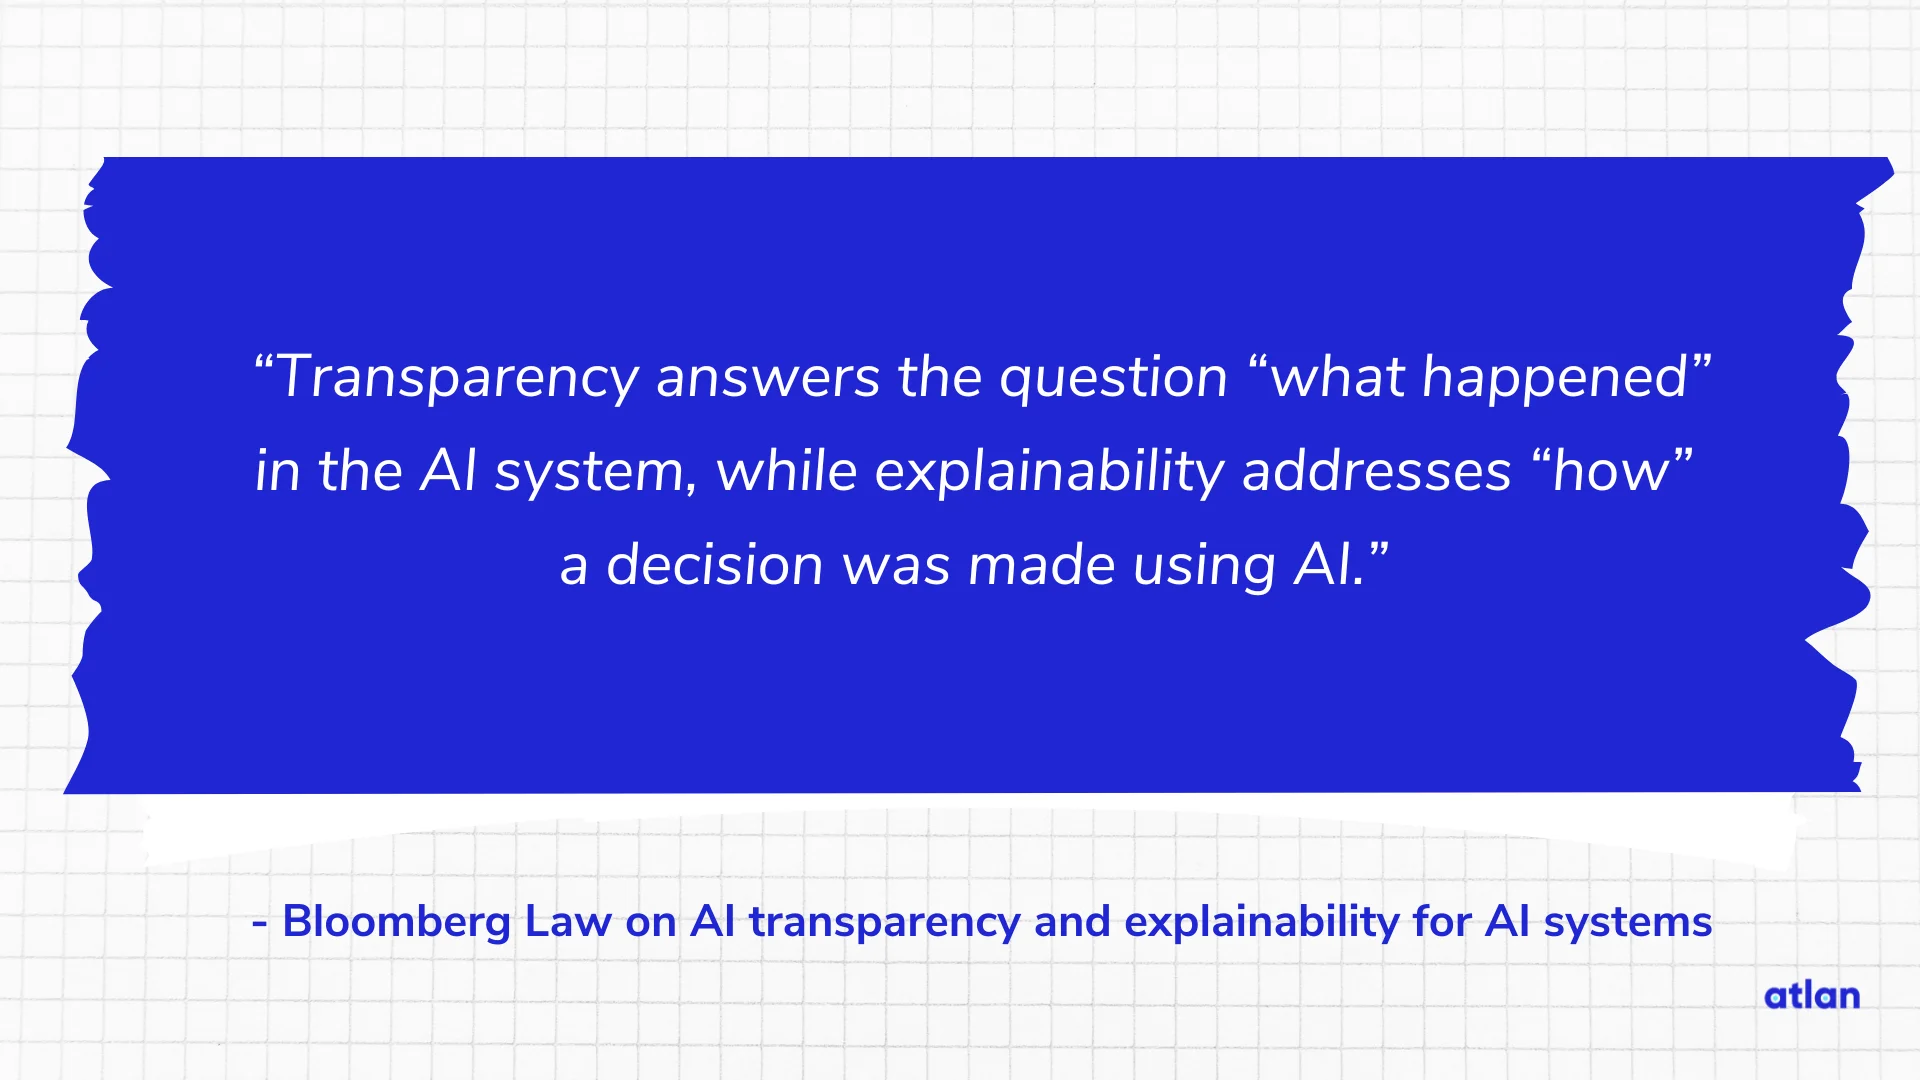 Bloomberg Law on AI transparency and explainability for AI systems